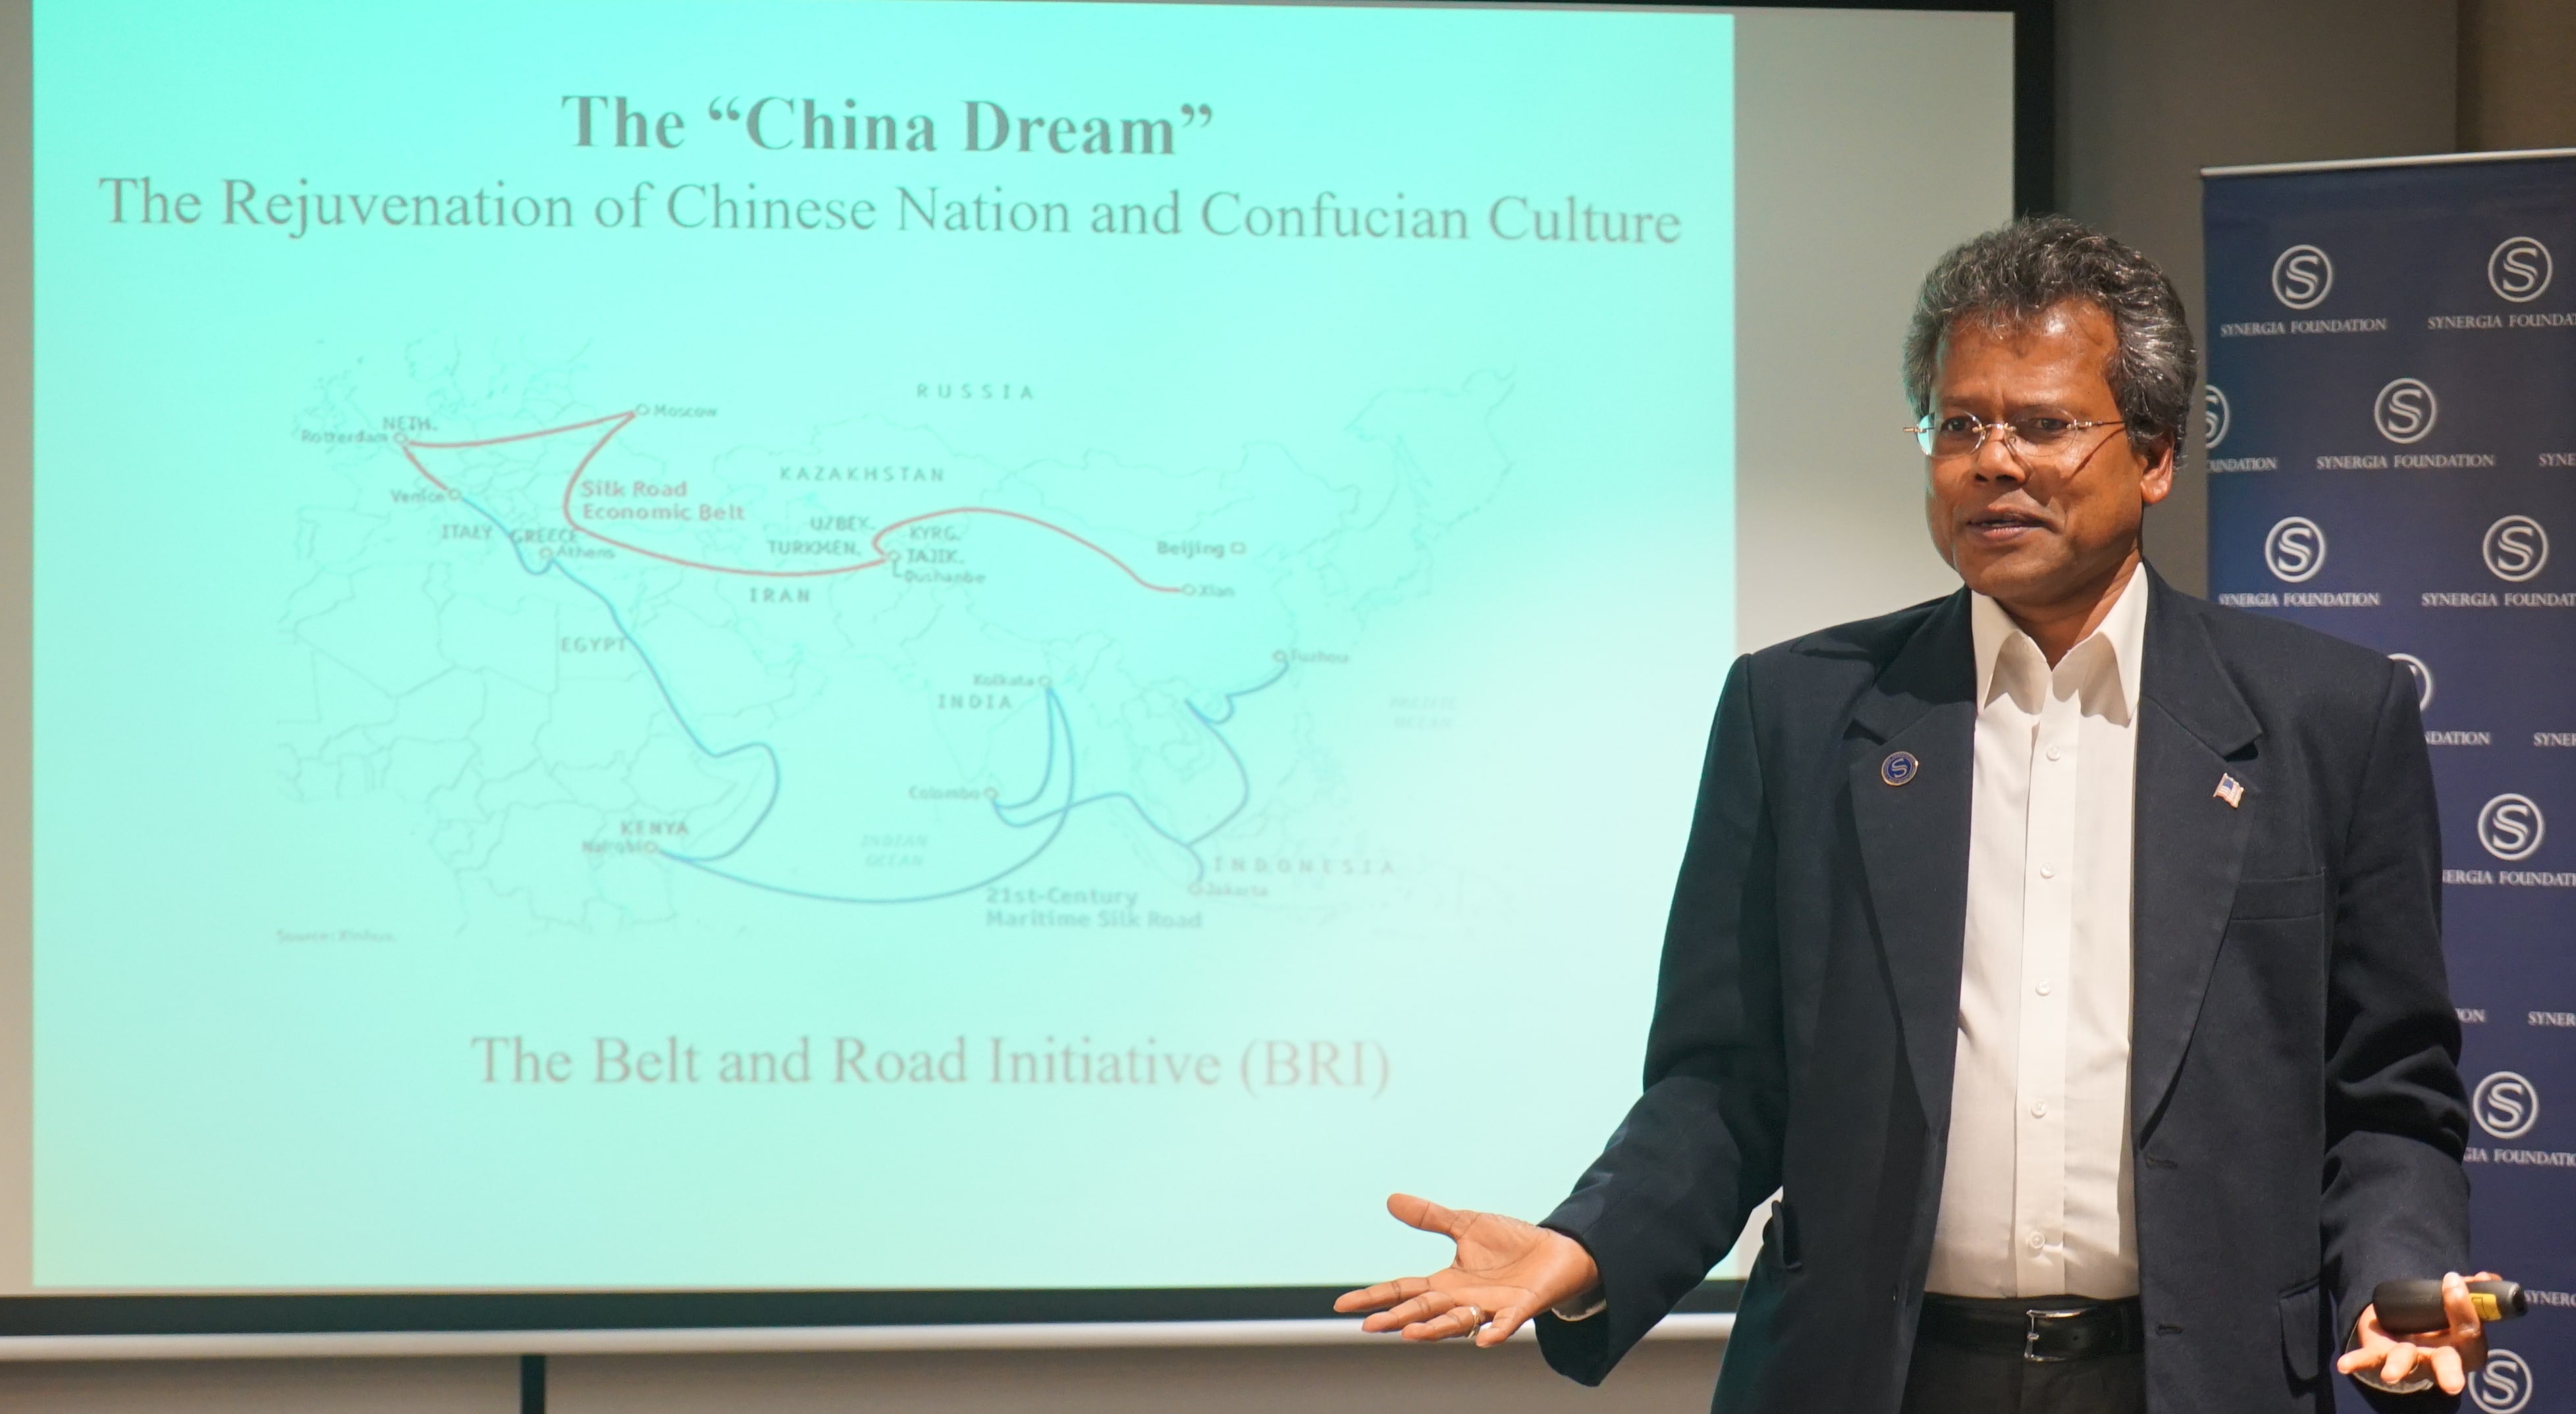 Understanding China and its Vision, Mission, and Challenges